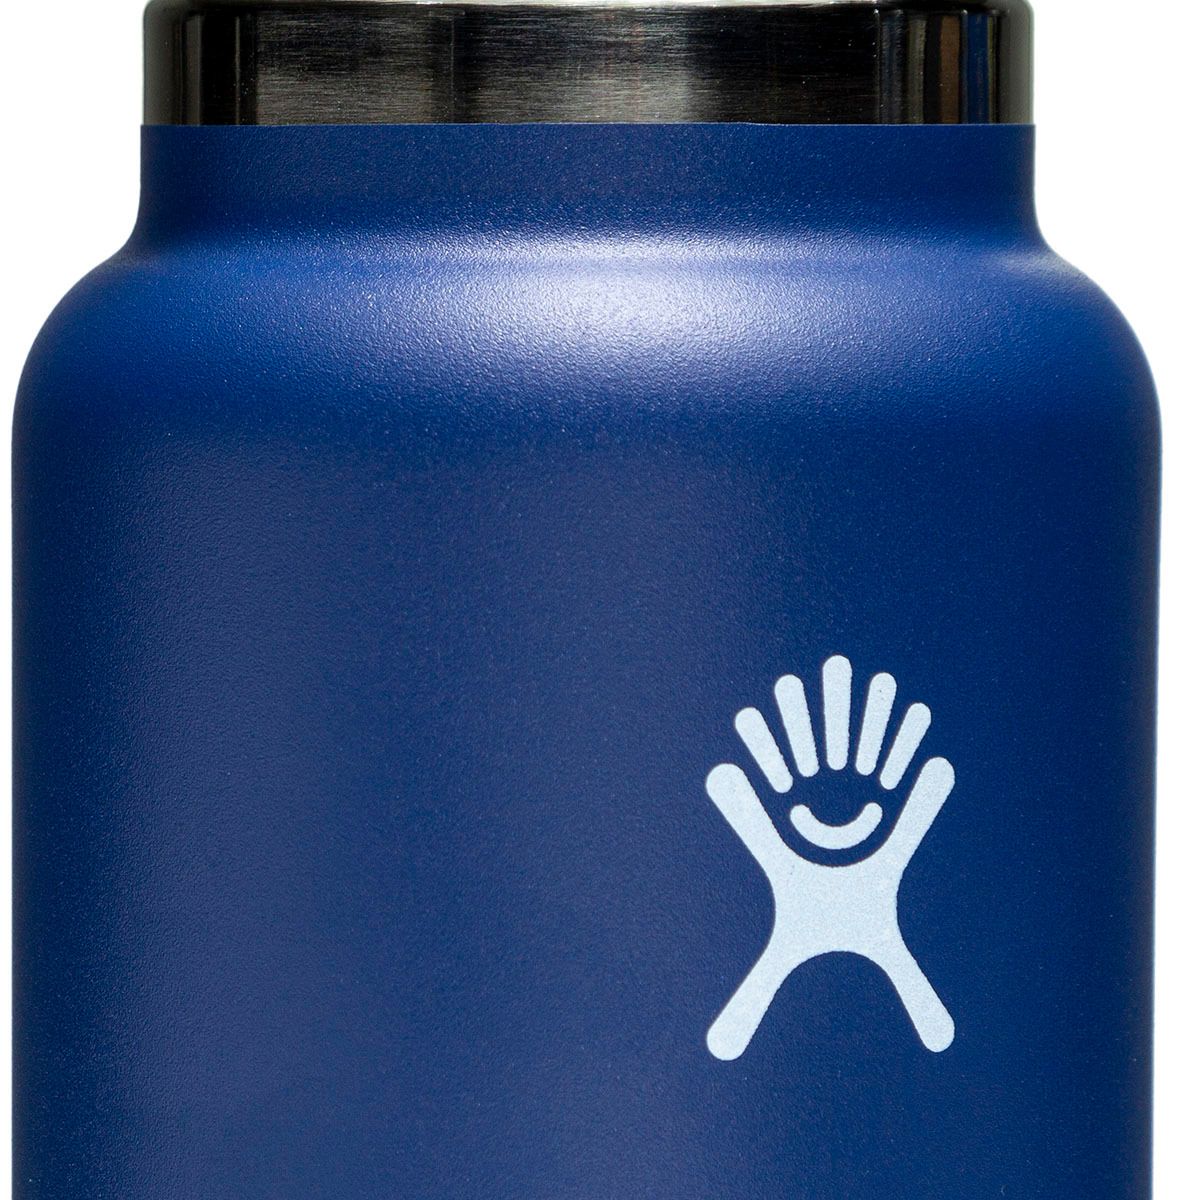 Thermos Hydro Flask wide mouth with flex cap 2.0 32 oz - Classic hiking -  Practices - Hiking